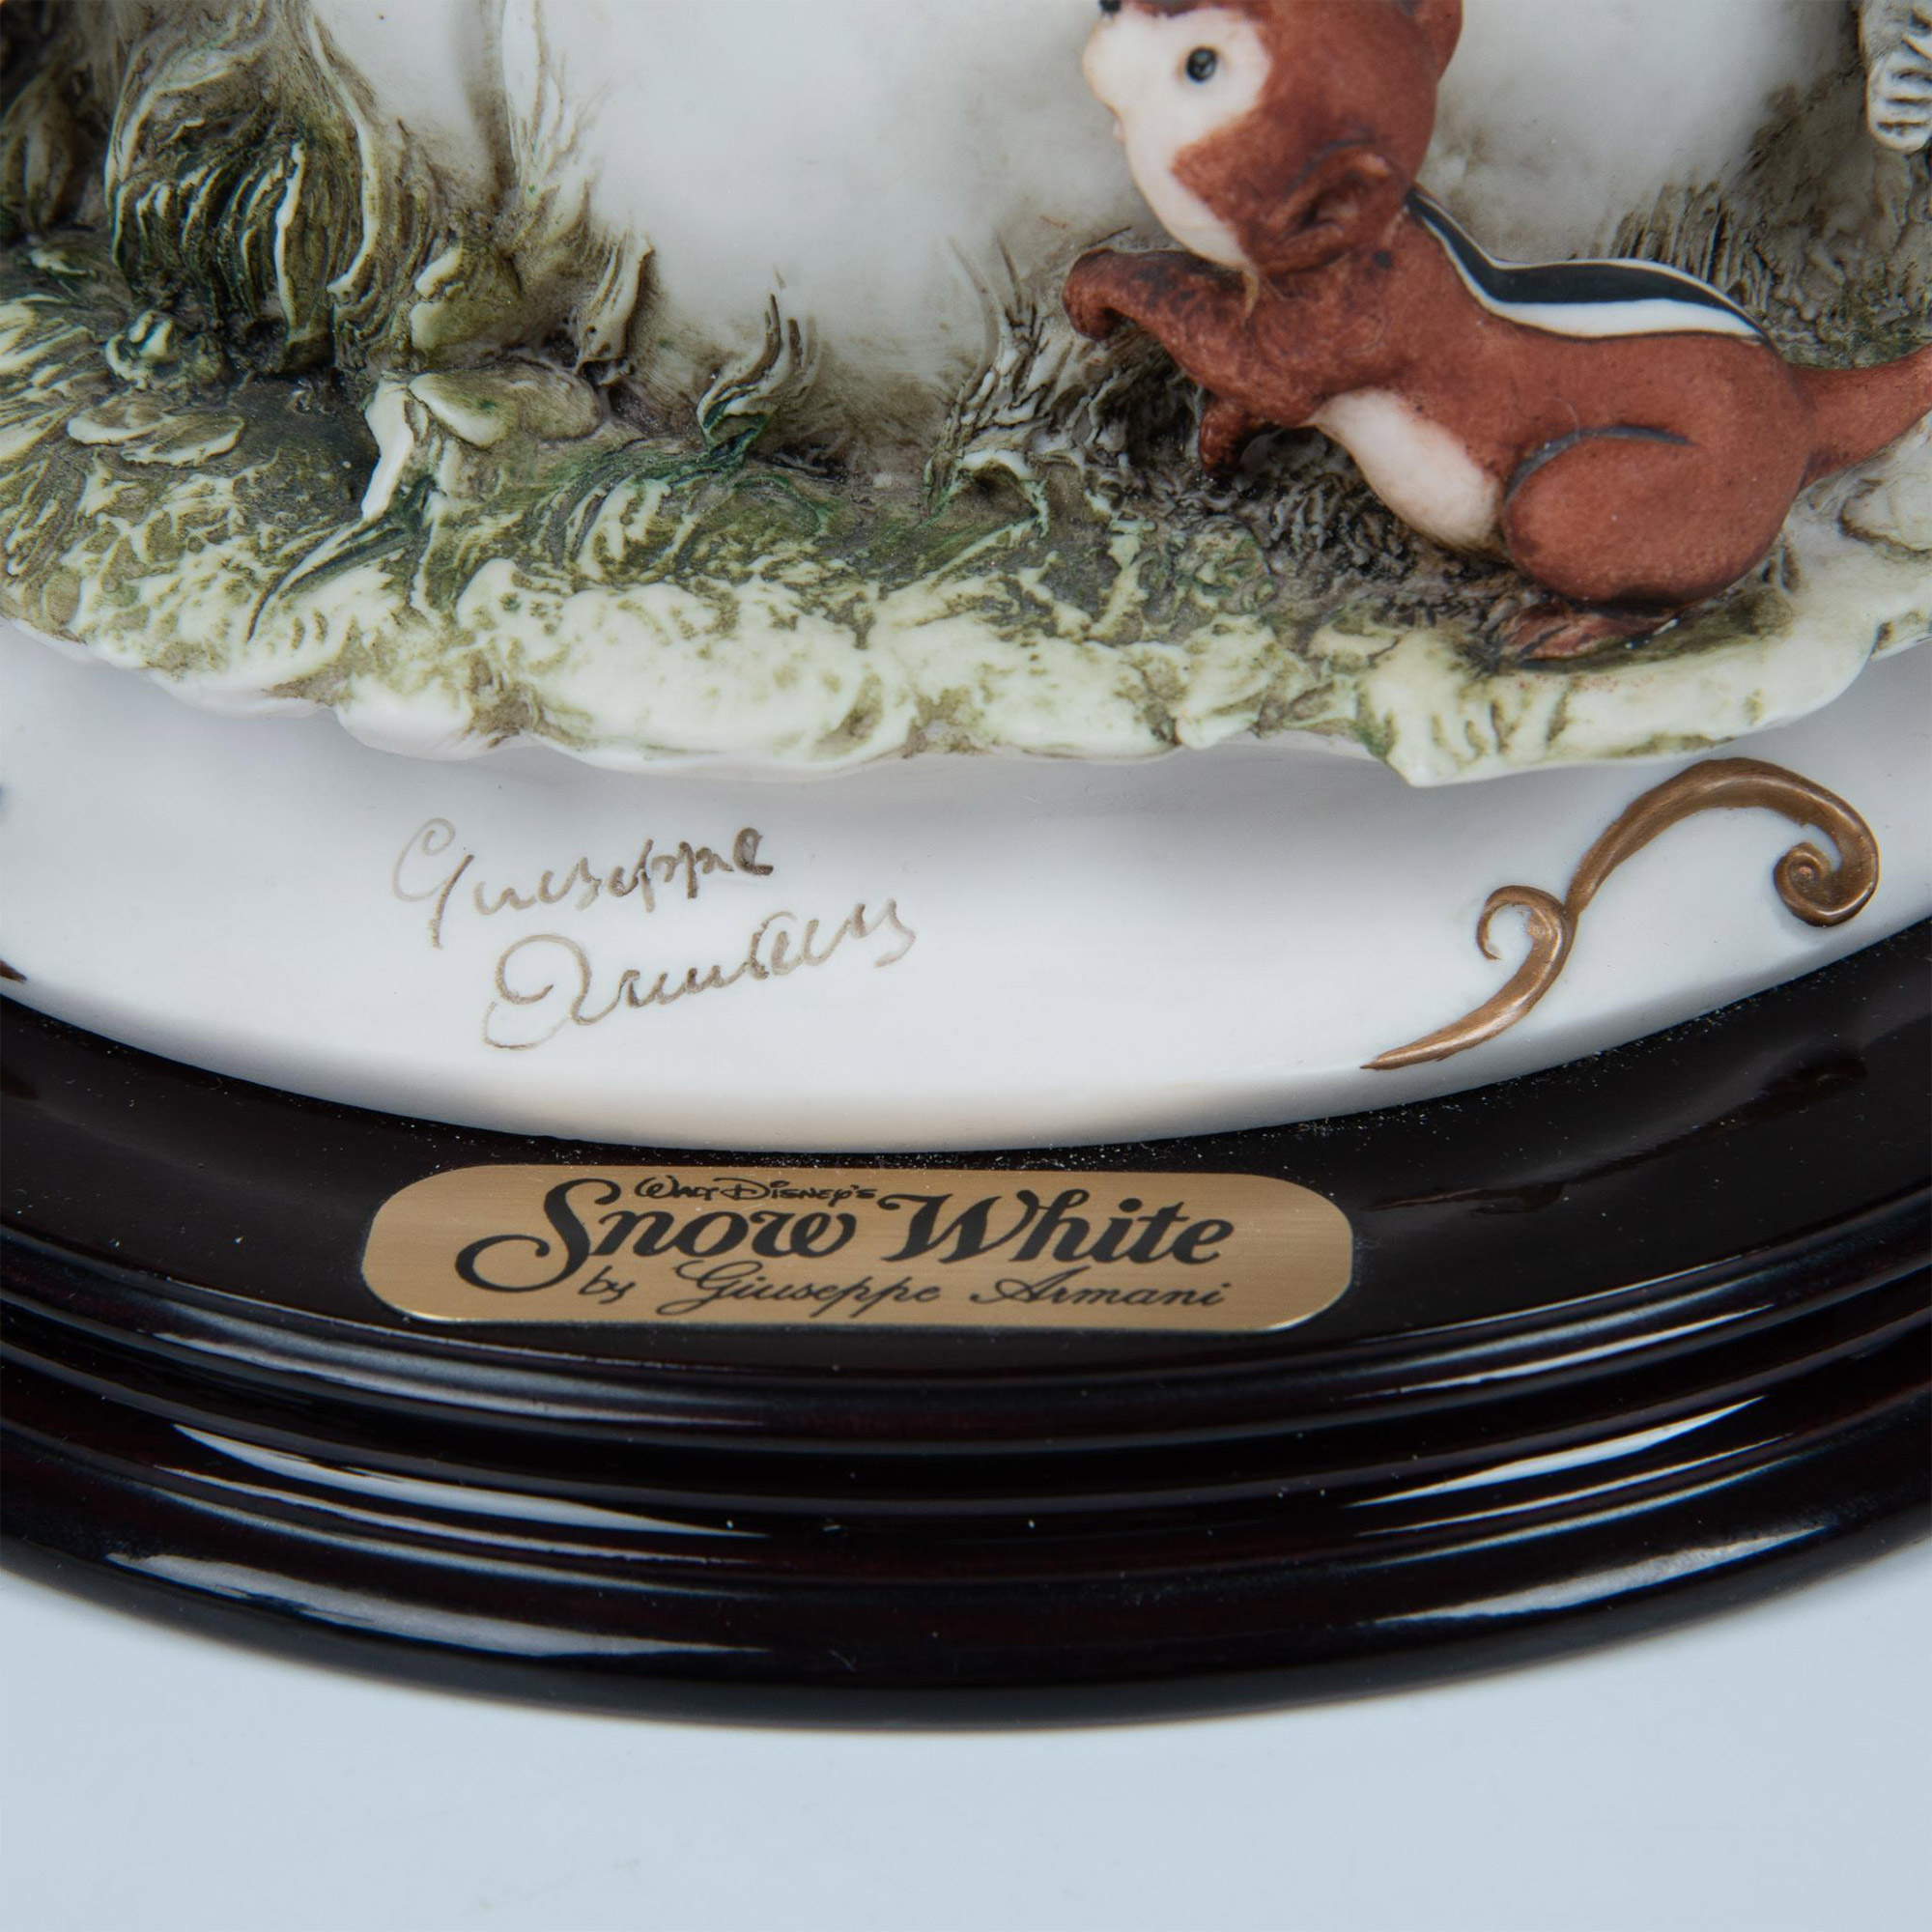 Florence by Giuseppe Armani for Disney Figurine, Snow White - Image 5 of 13